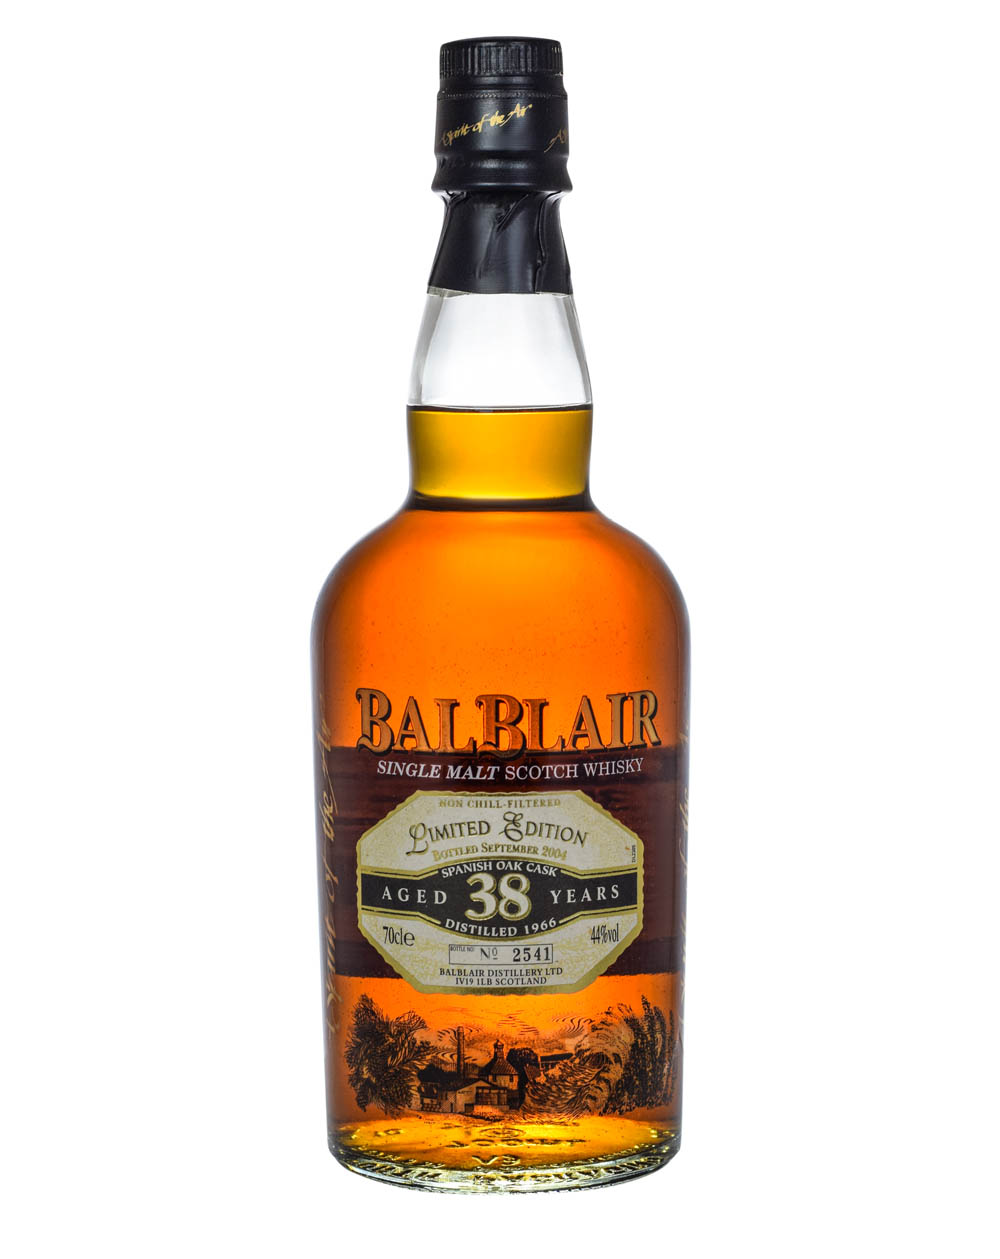 Balblair 1966 Limited Edition 38 Years Old Musthave Malts MHM